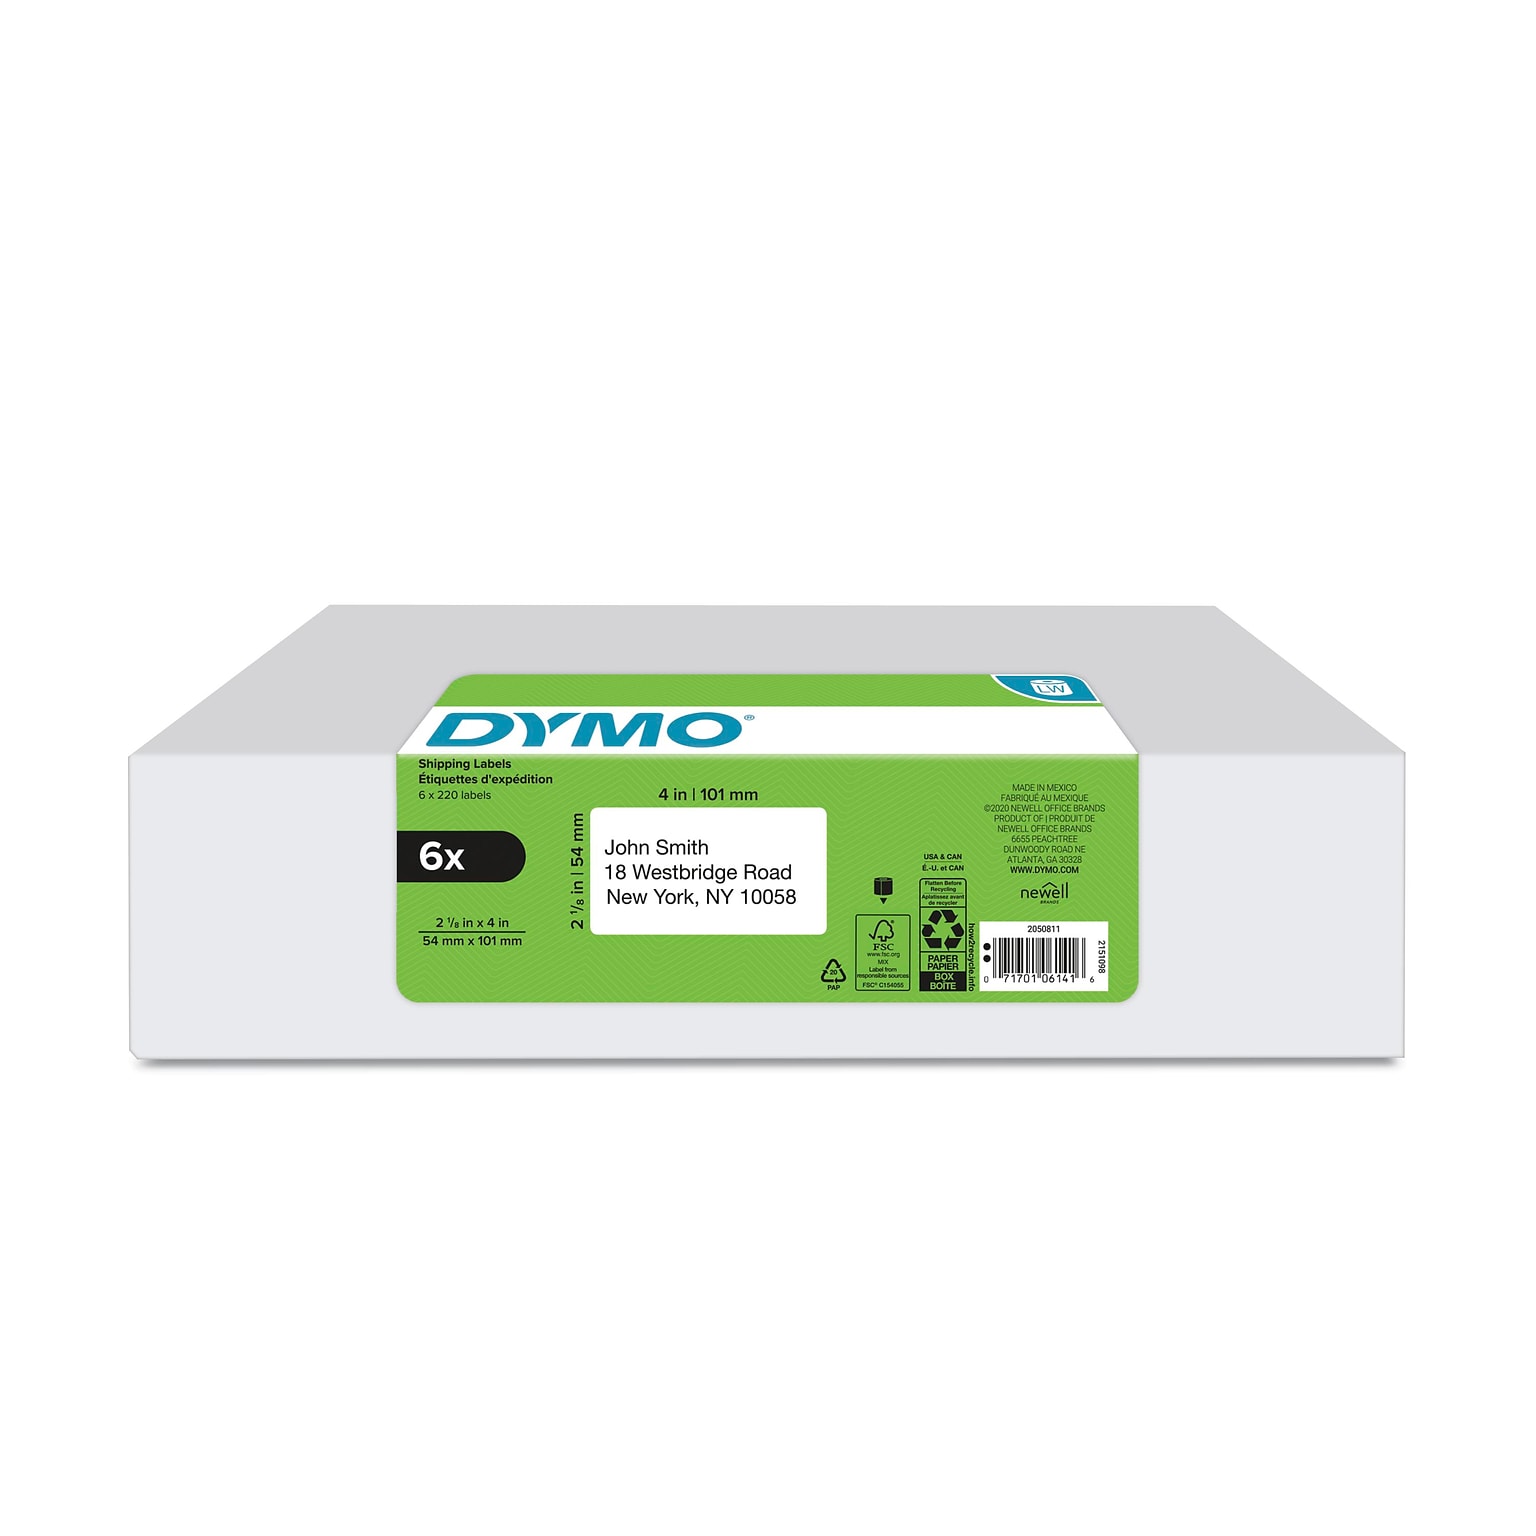 DYMO LabelWriter 2050811 Shipping Labels, 4 x 2-1/8, Black on White, 220 Labels/Roll, 6 Rolls/Box (2050811)